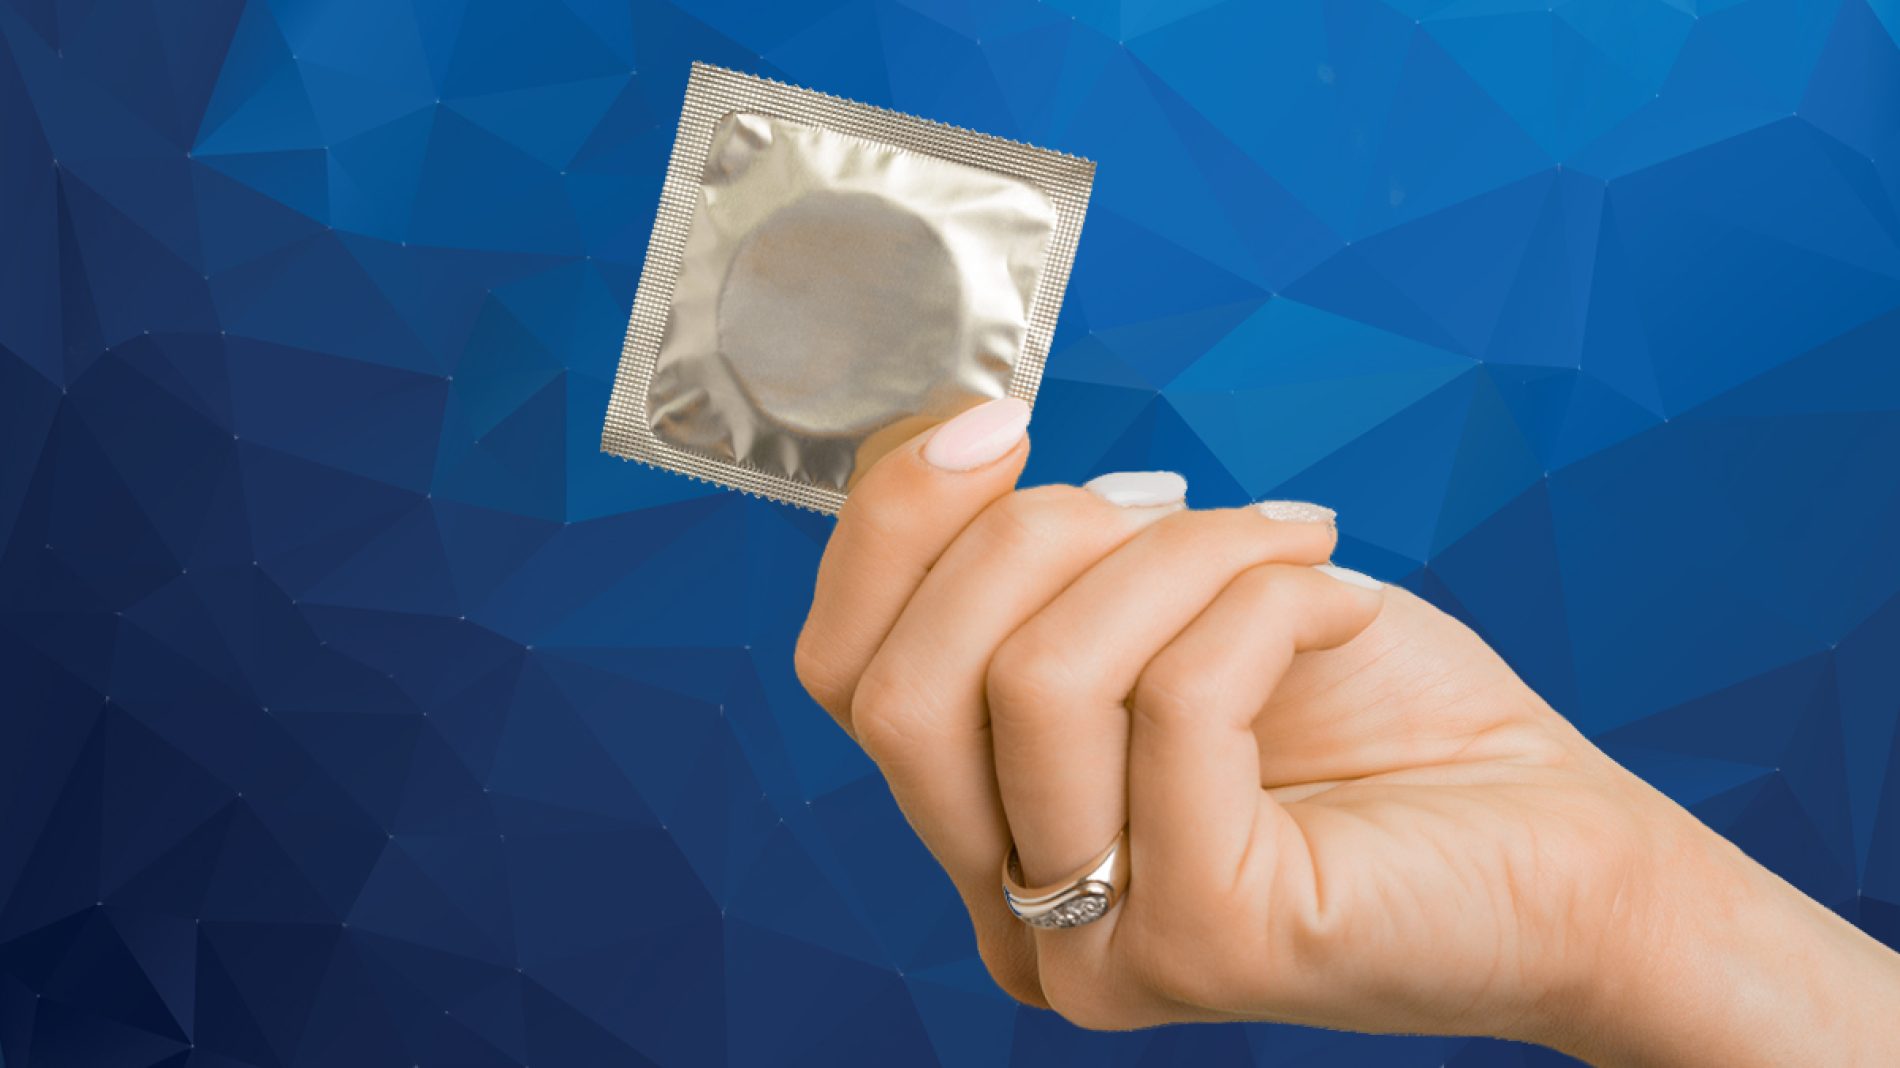 A hand holding a condom.